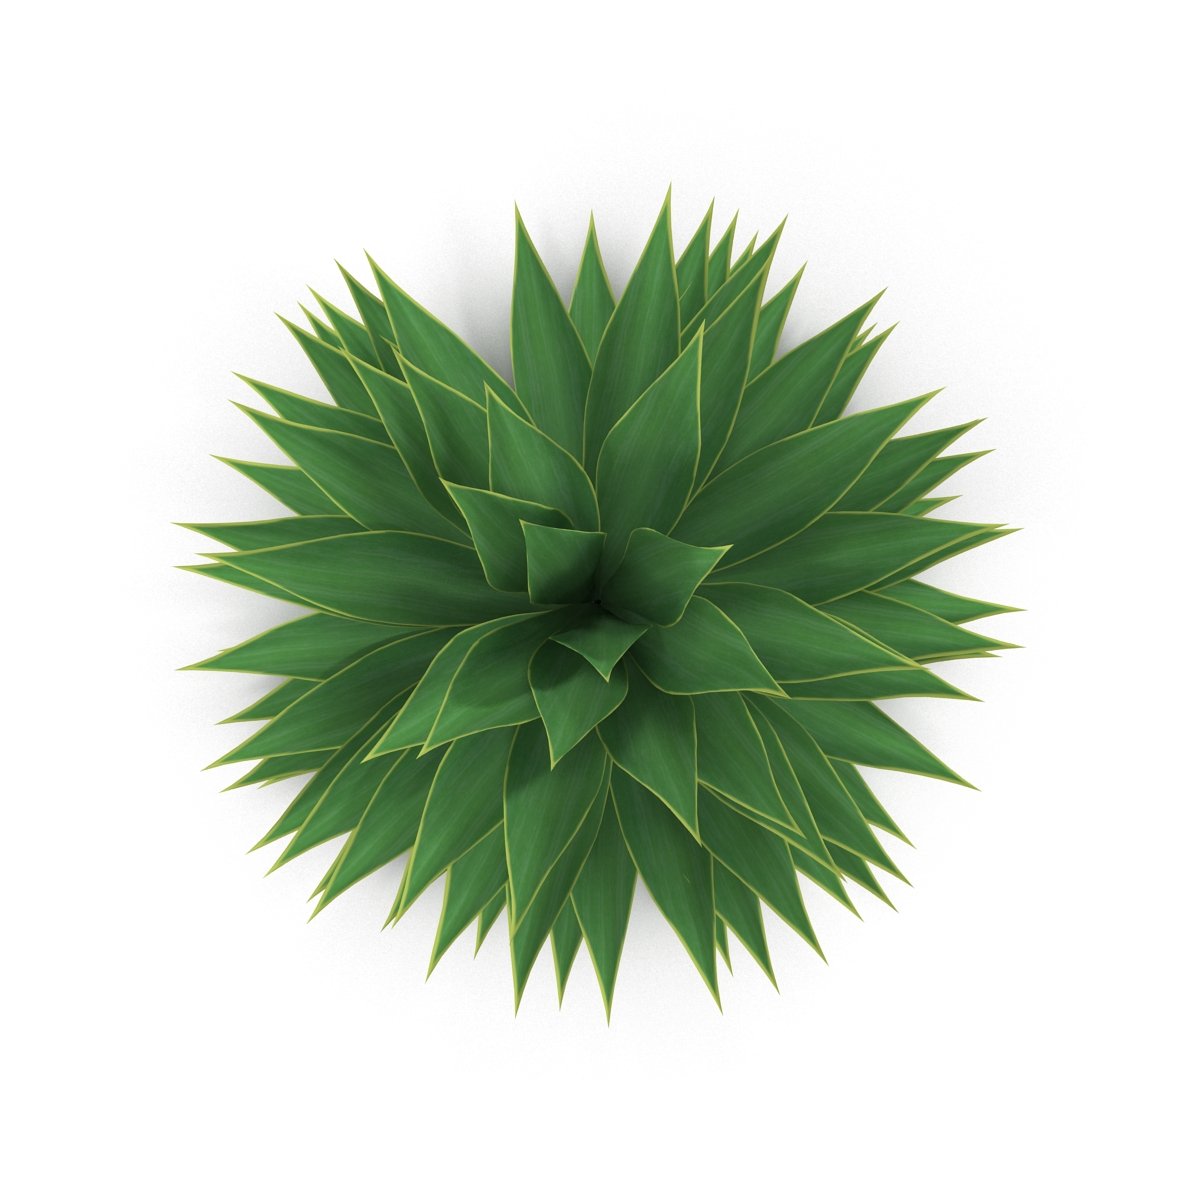 Overhead view of a green plant on a white background.